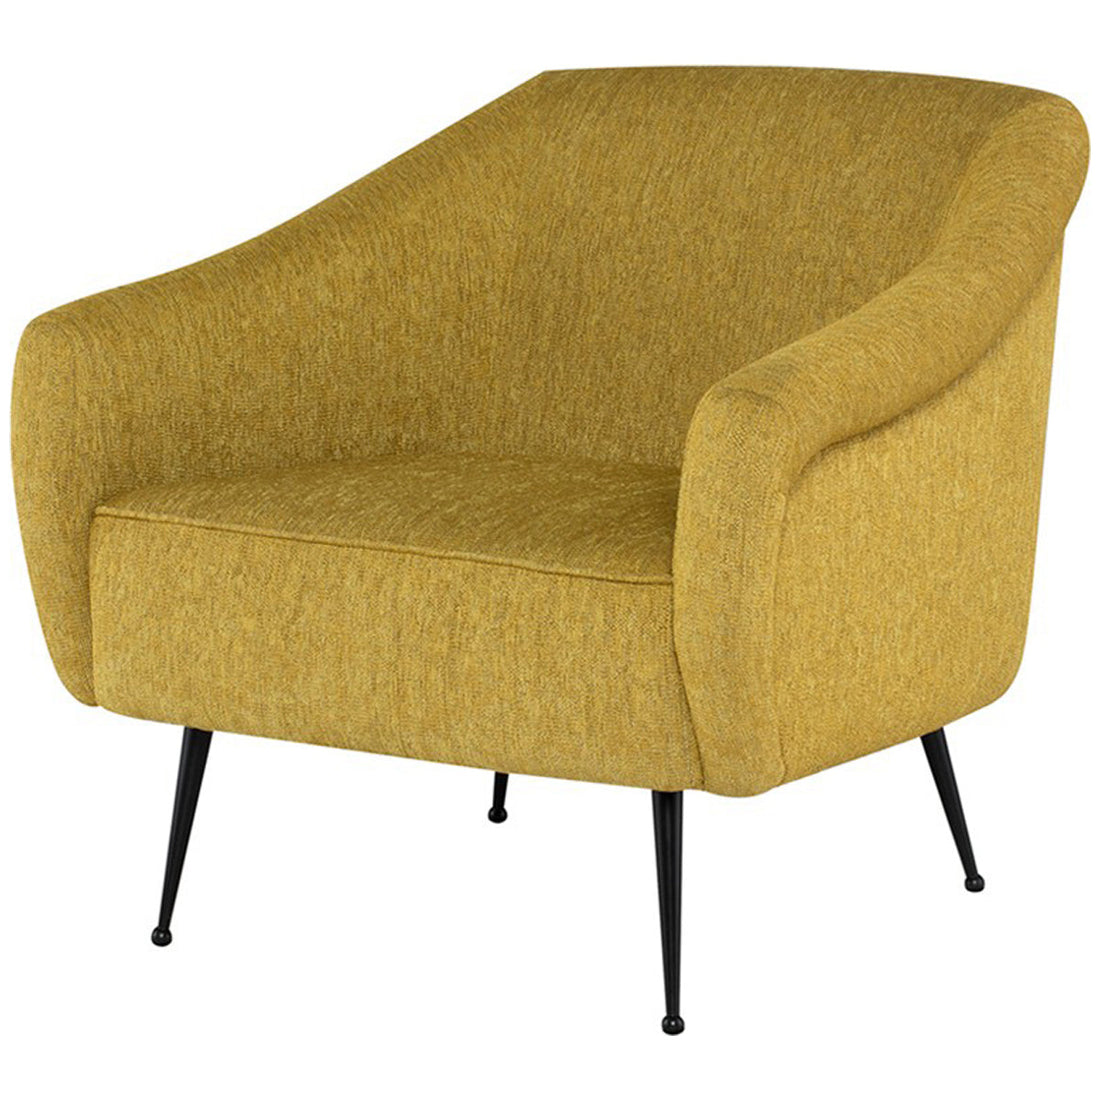 Nuevo Living Lucie Occasional Chair